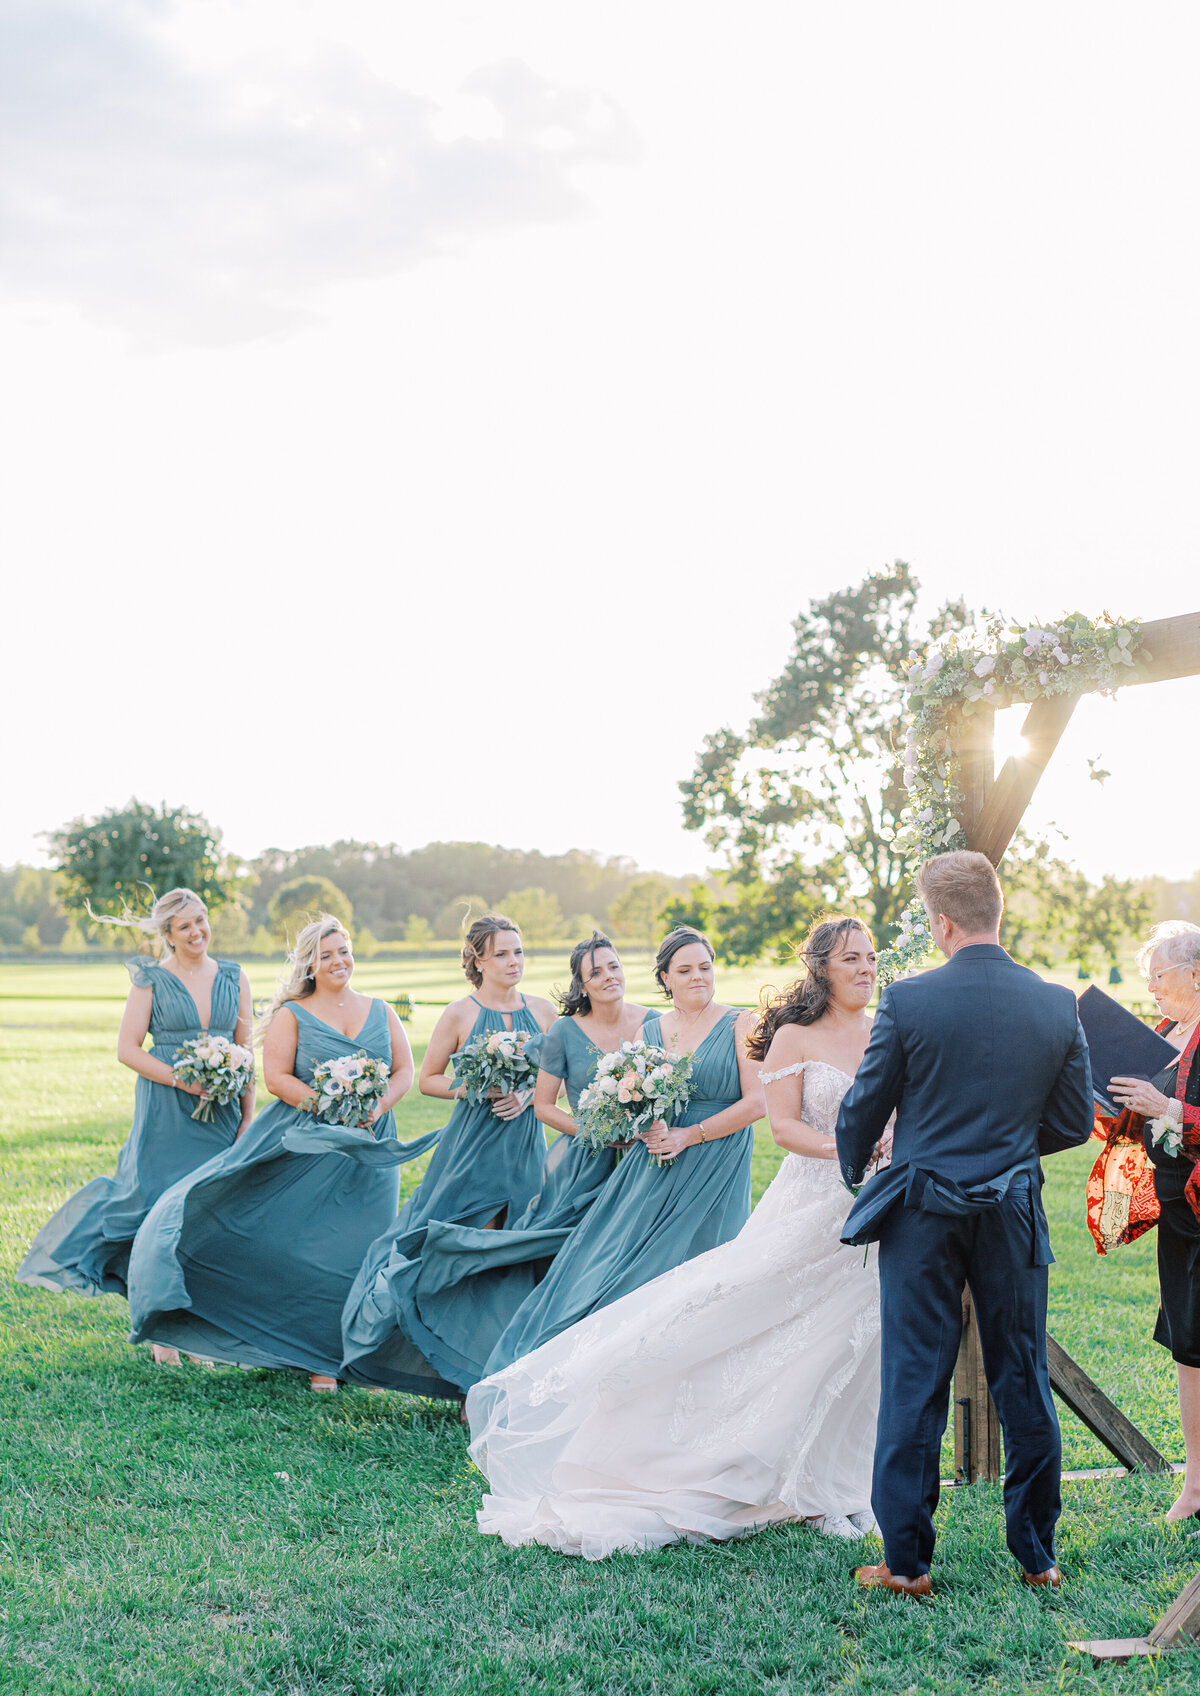 Ashley-Eagleson-Photography-Ceremony-0118-850A0343